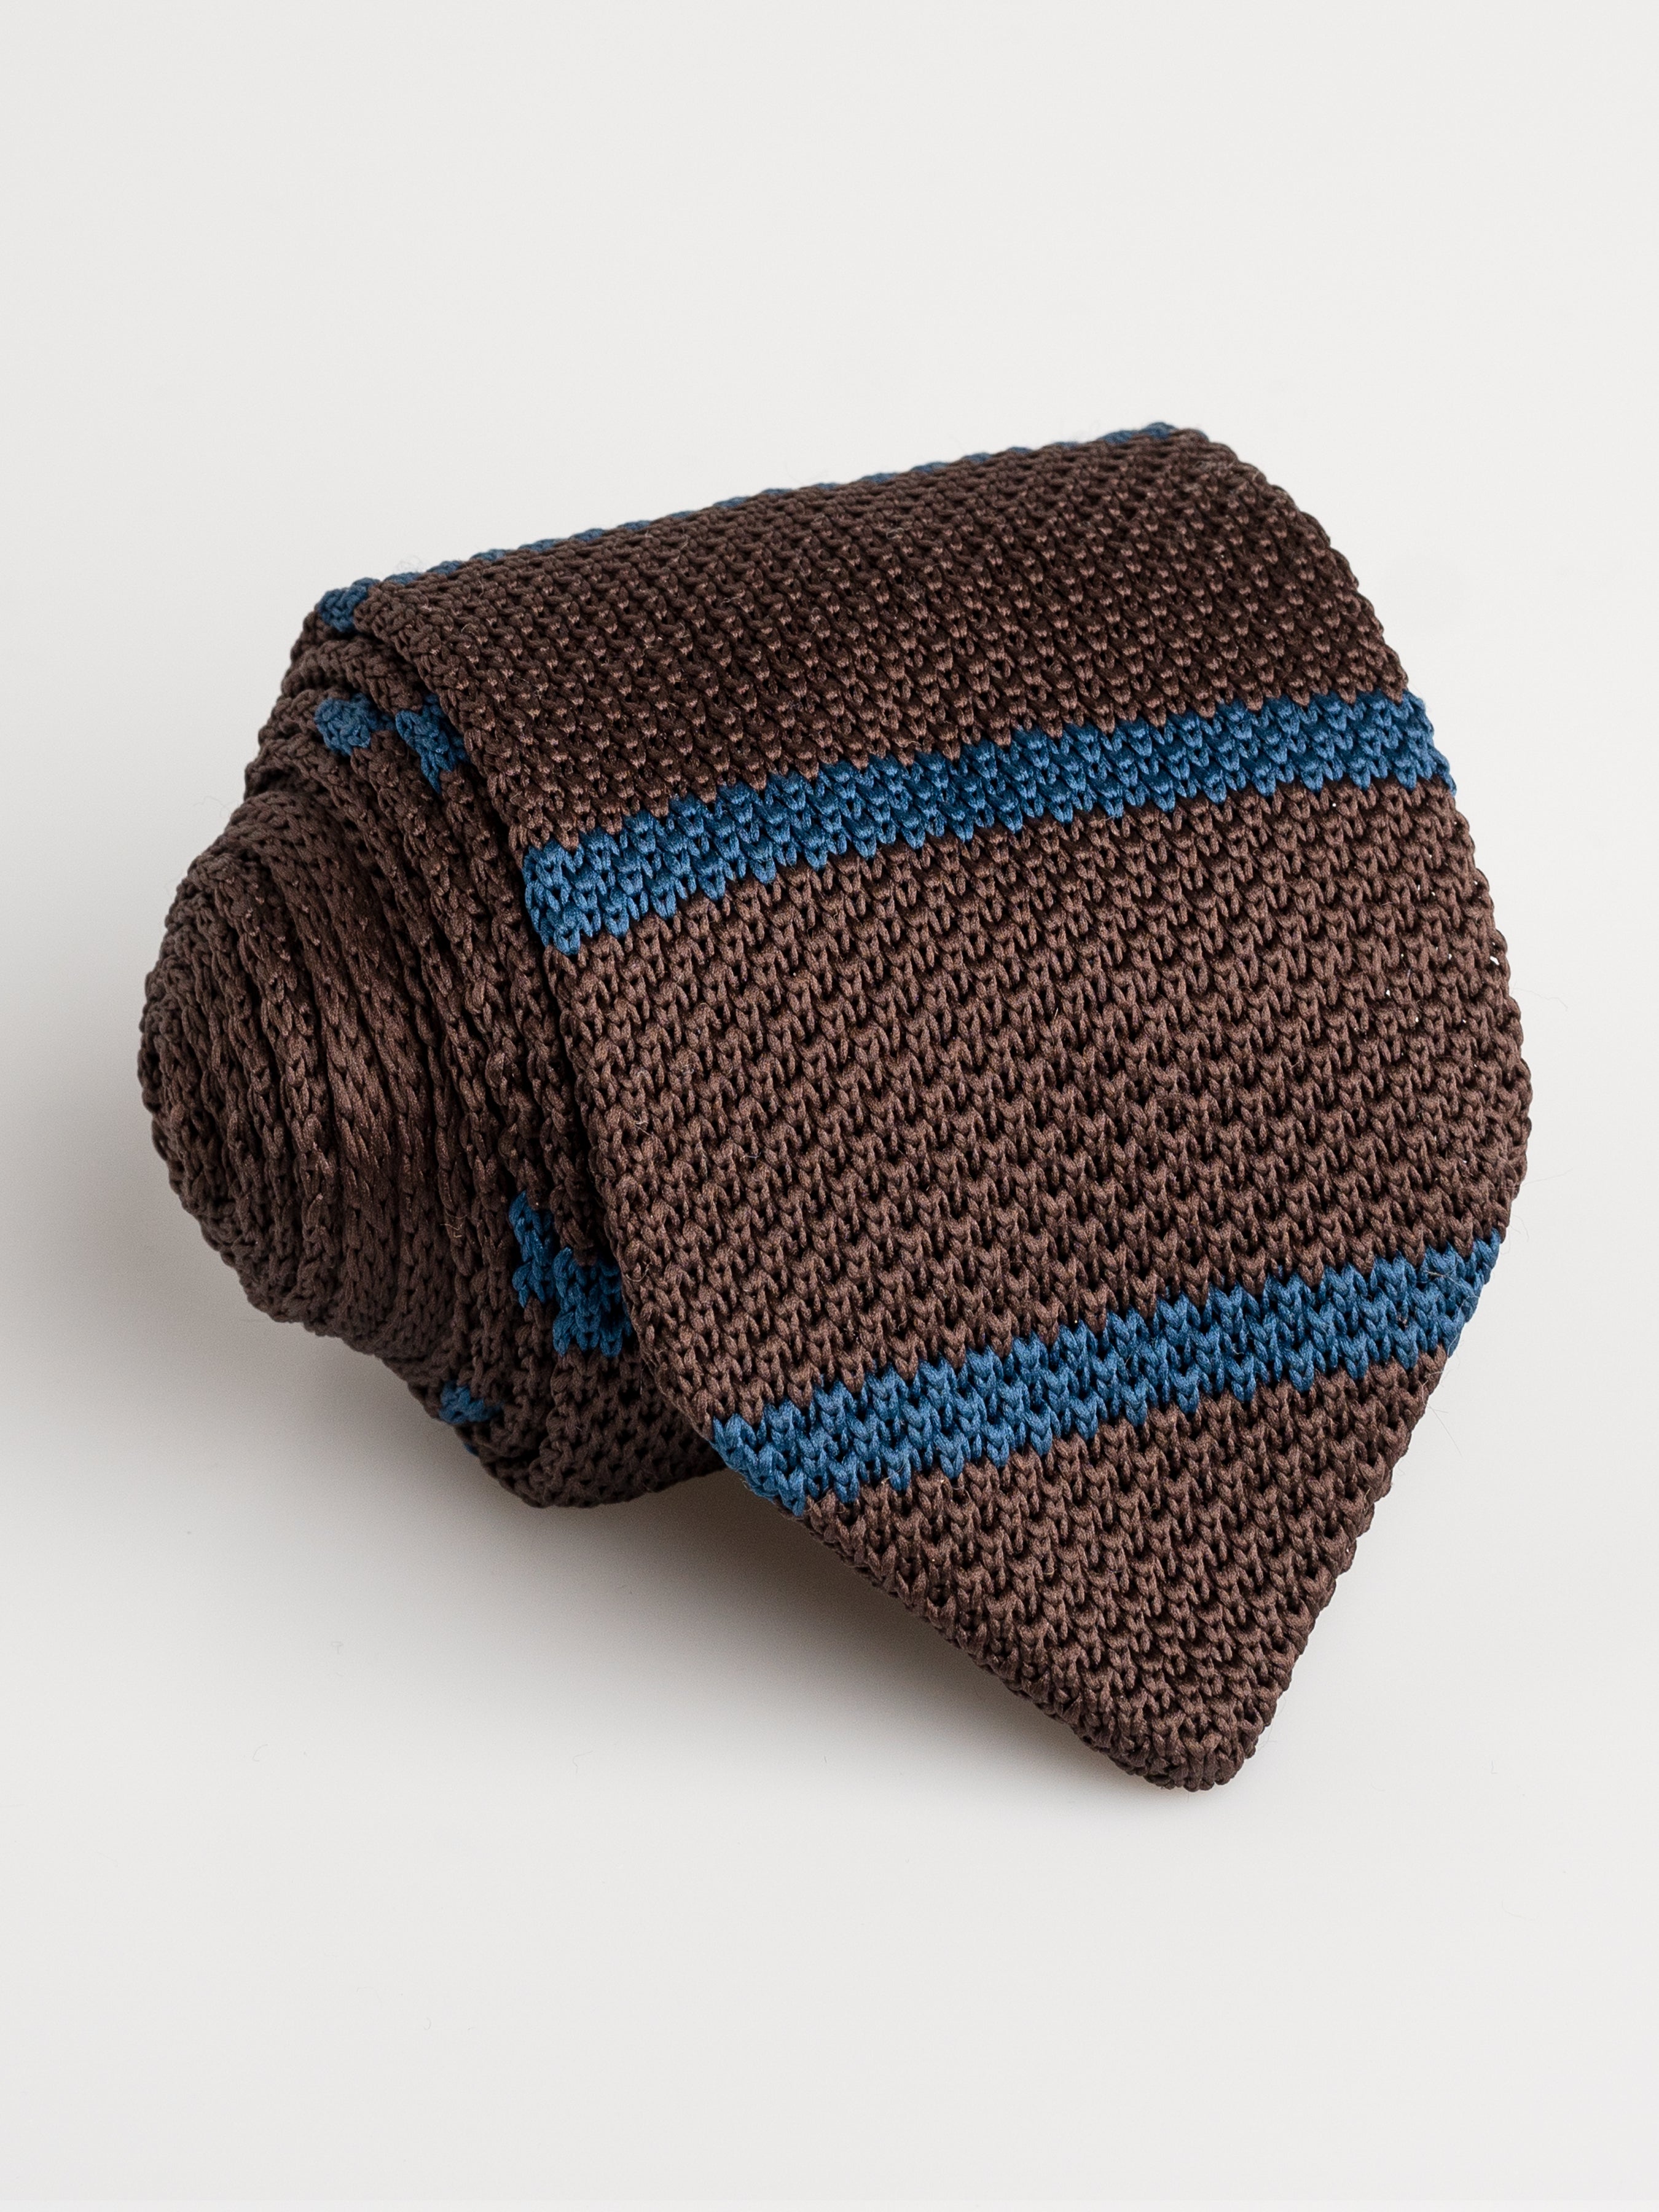 Knit Tie - Coffee With Turquoise Stripes